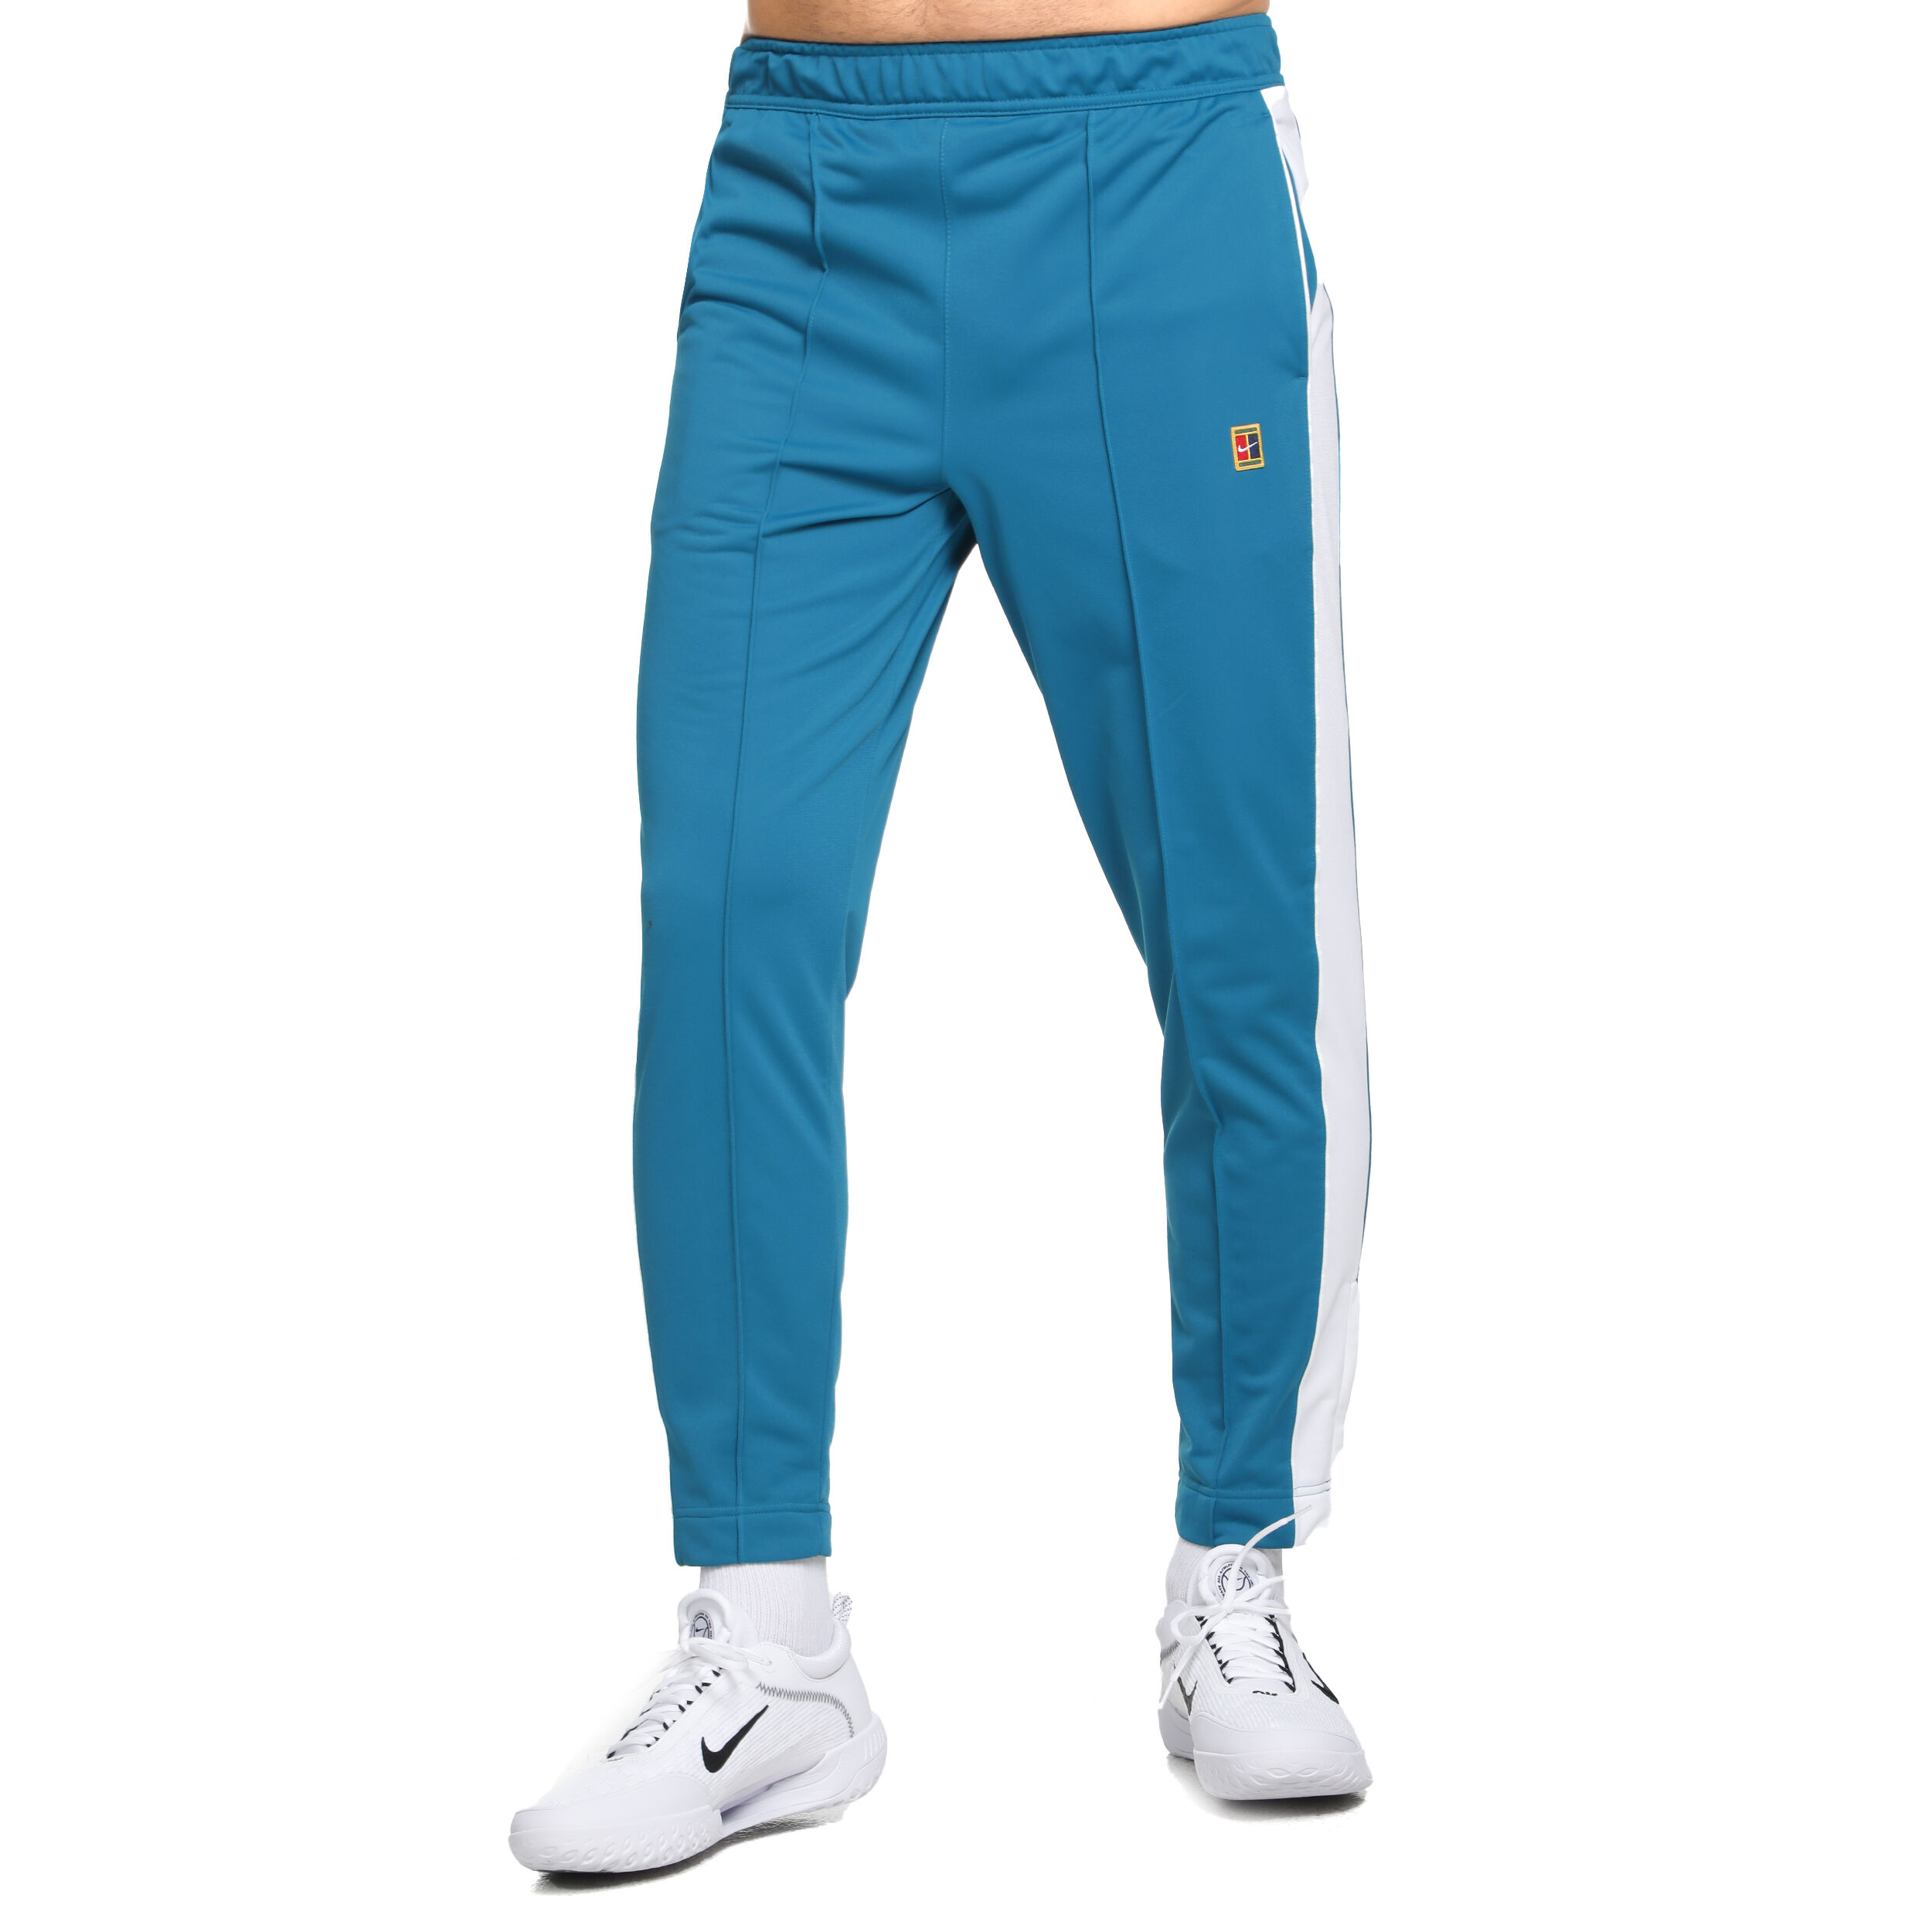 Tennis Trousers for Men & Boys – SK SPORTKIND